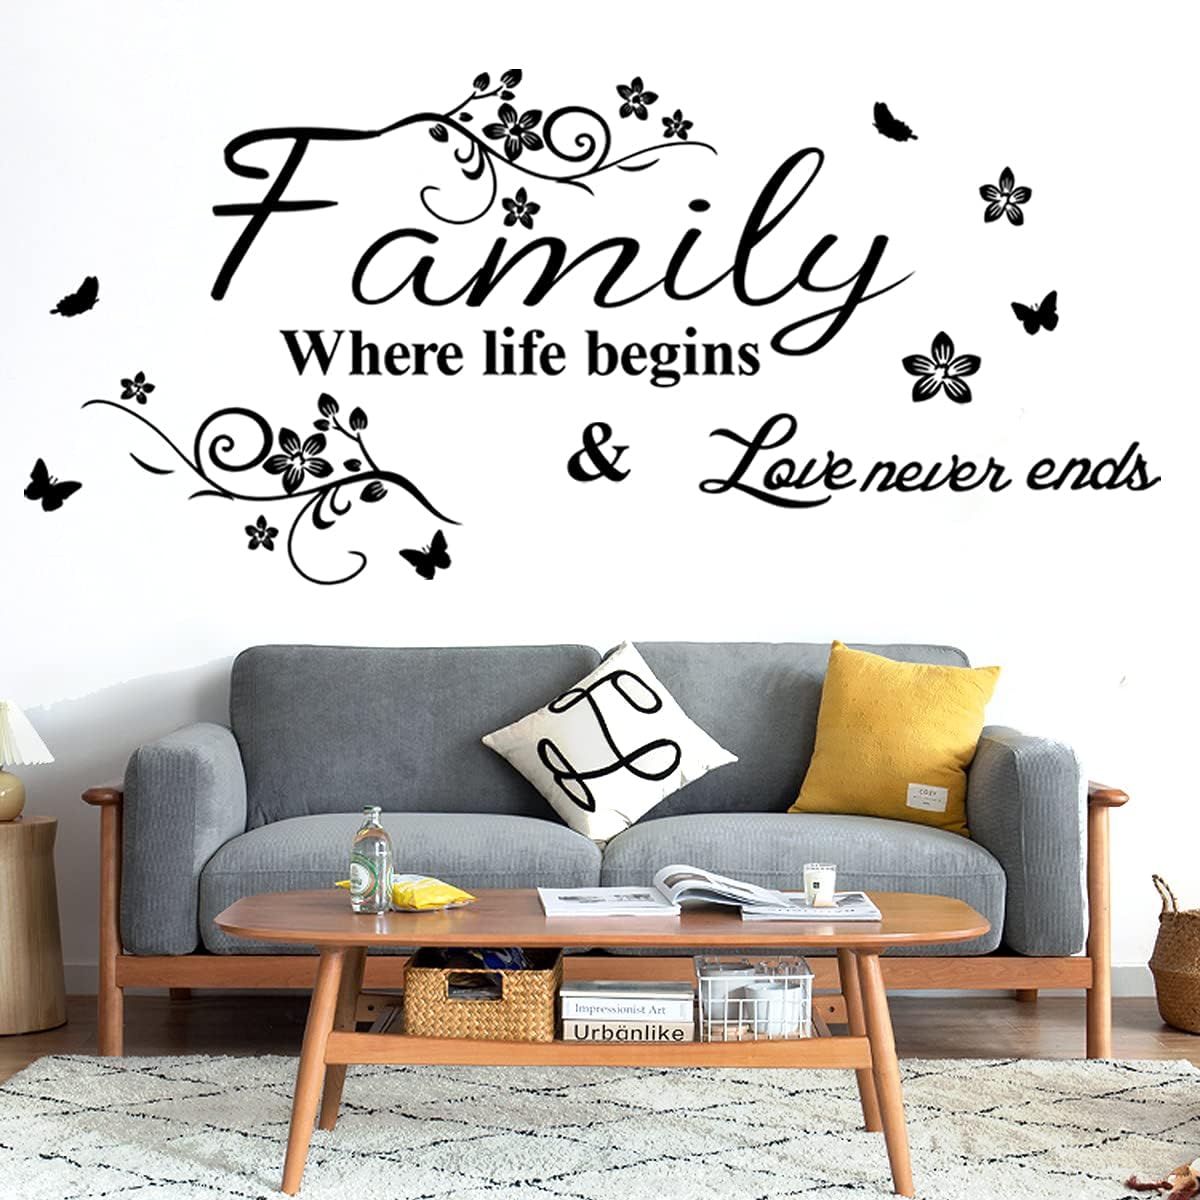 633ff018fd5cf02c492ed62e-wall-stickers-for-bedroom-and-living.jpg